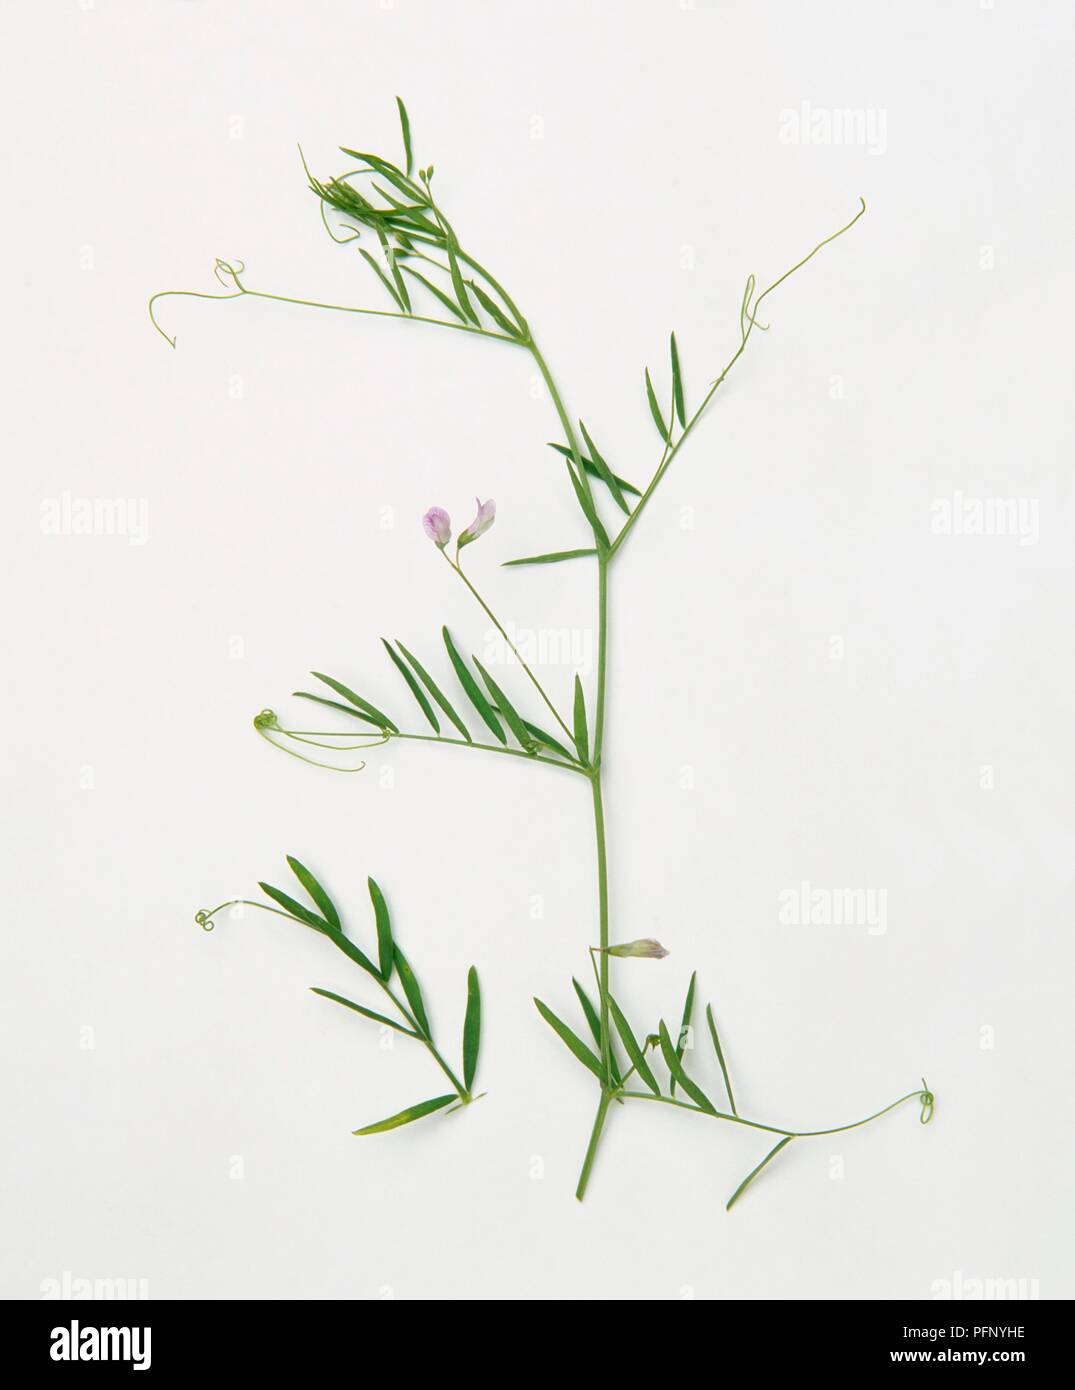 Vicia tetrasperma (Smooth tare), stem with leaves and flowers Stock Photo